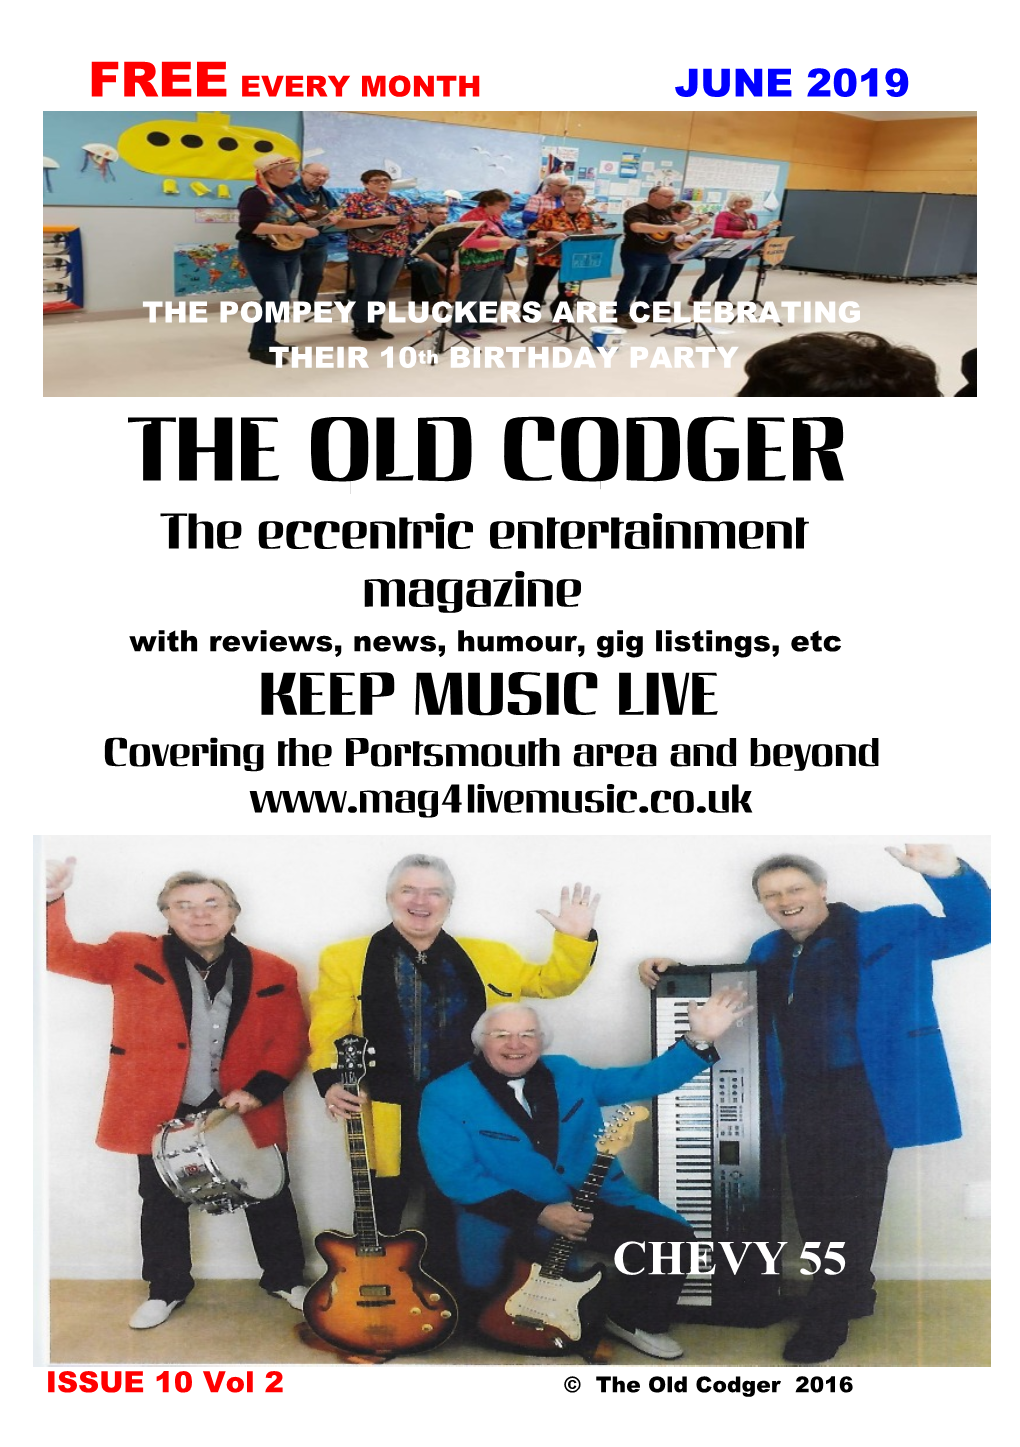 The Old Codger July 17